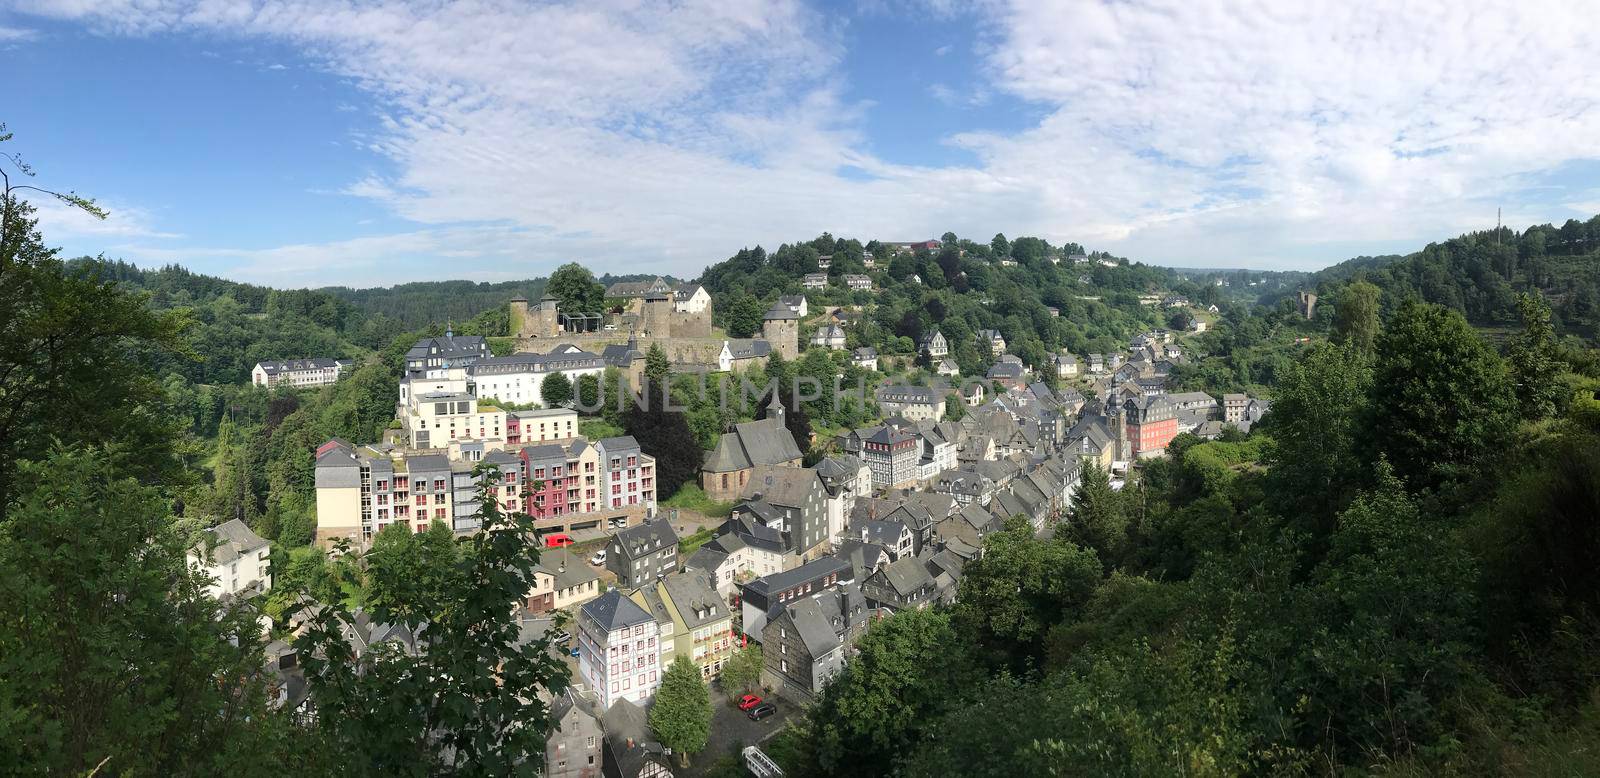 Panorama from monschau in Germany 